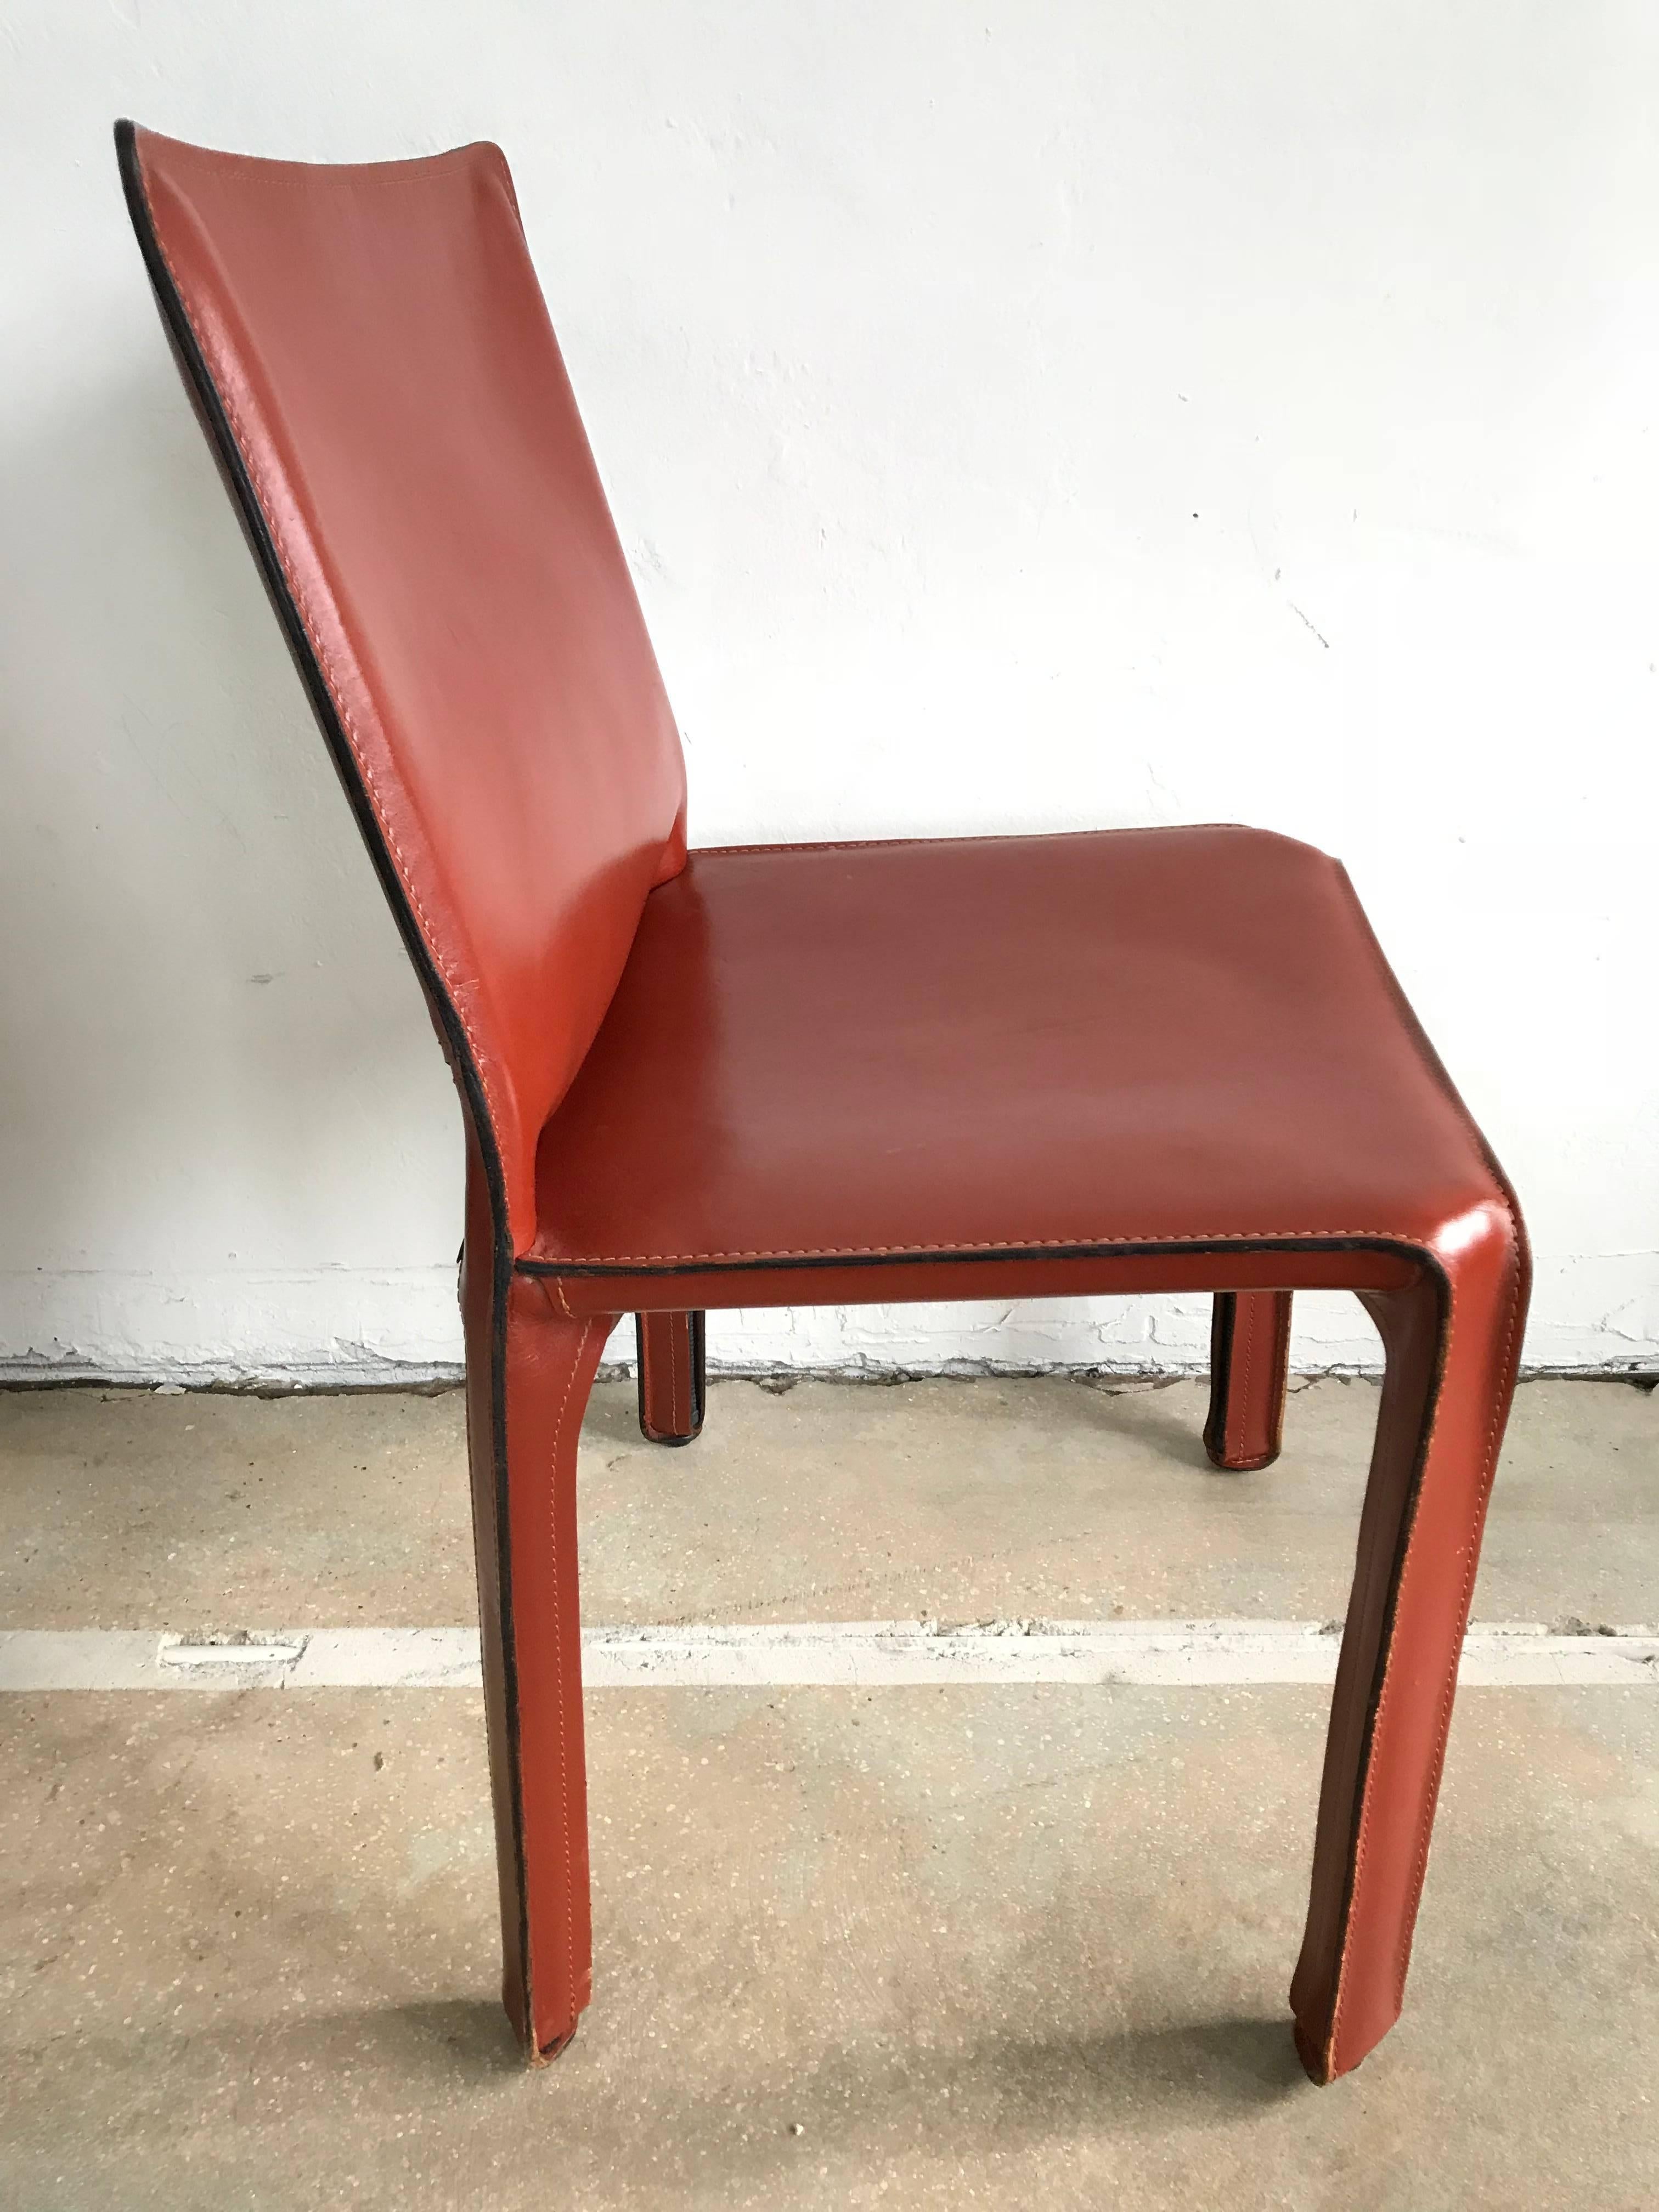 Modern Pair of Mario Bellini “Cab” Dining Chairs for Cassina